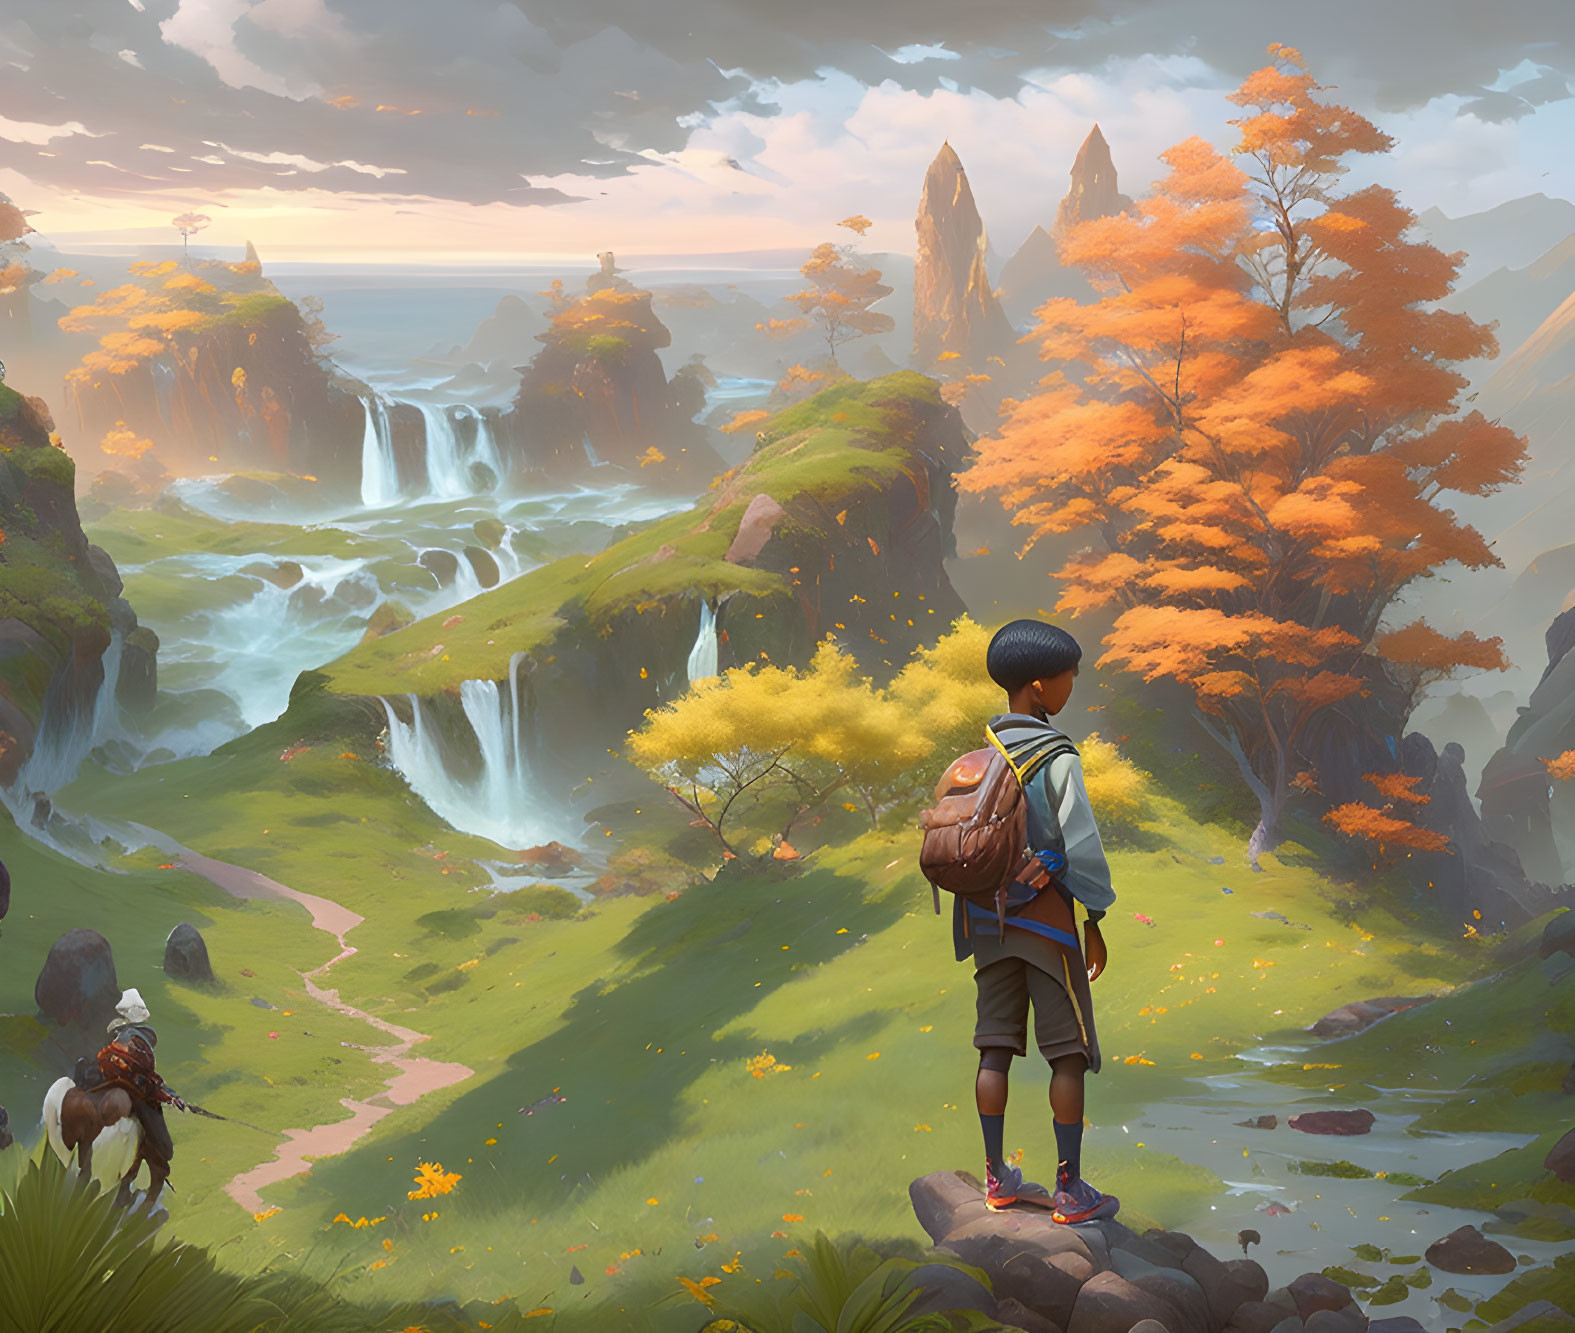 Traveler admiring majestic landscape with waterfalls, autumn trees, rider, and rocky peaks.